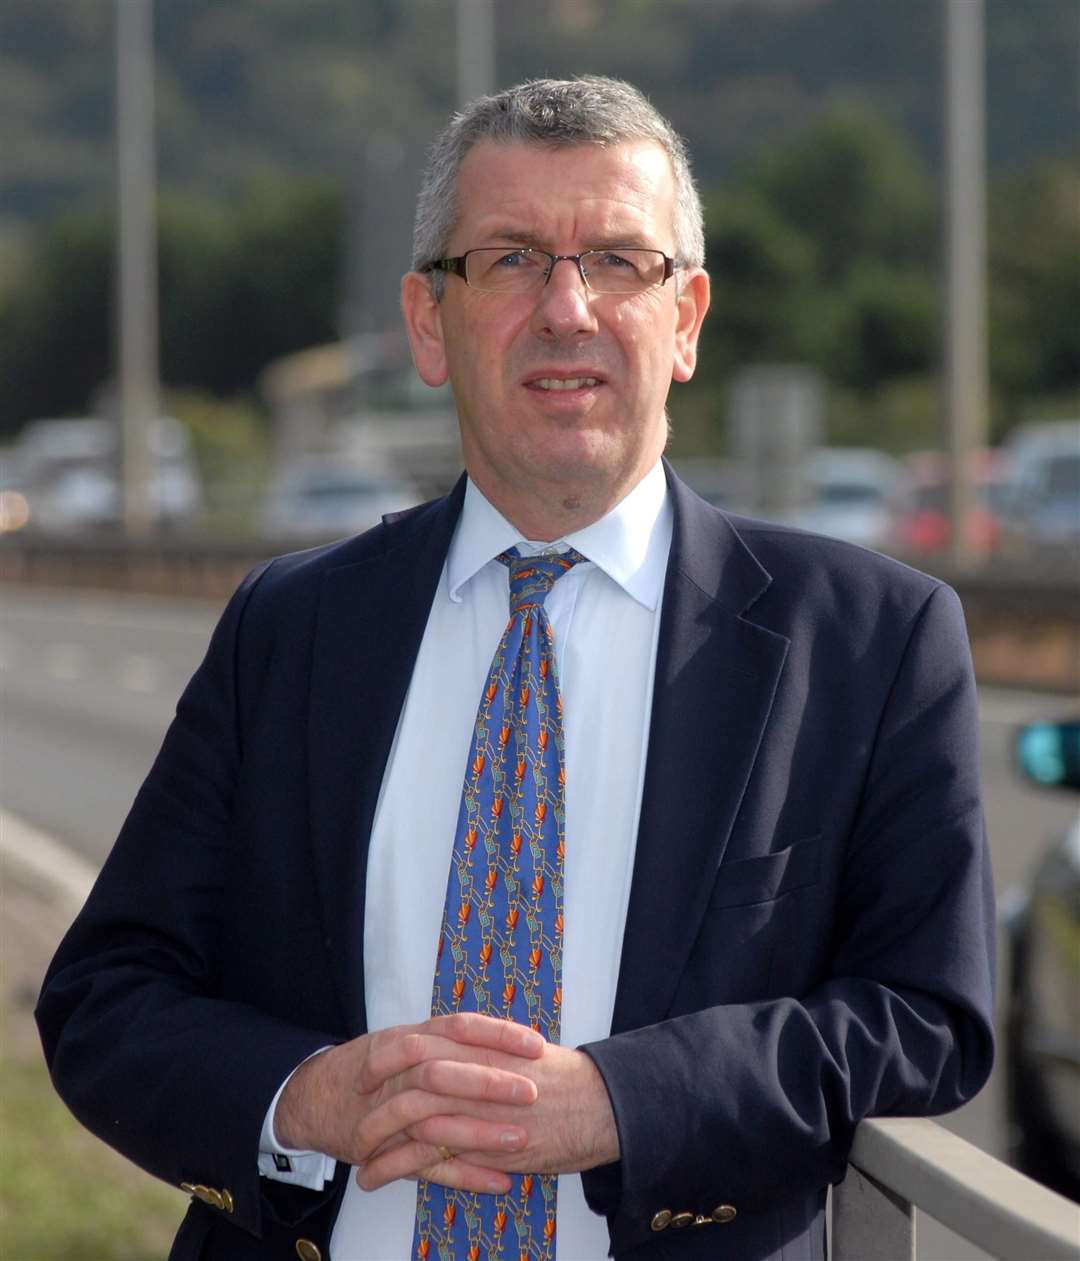 David Stewart MSP – 'These figures are quite staggering for our region'.